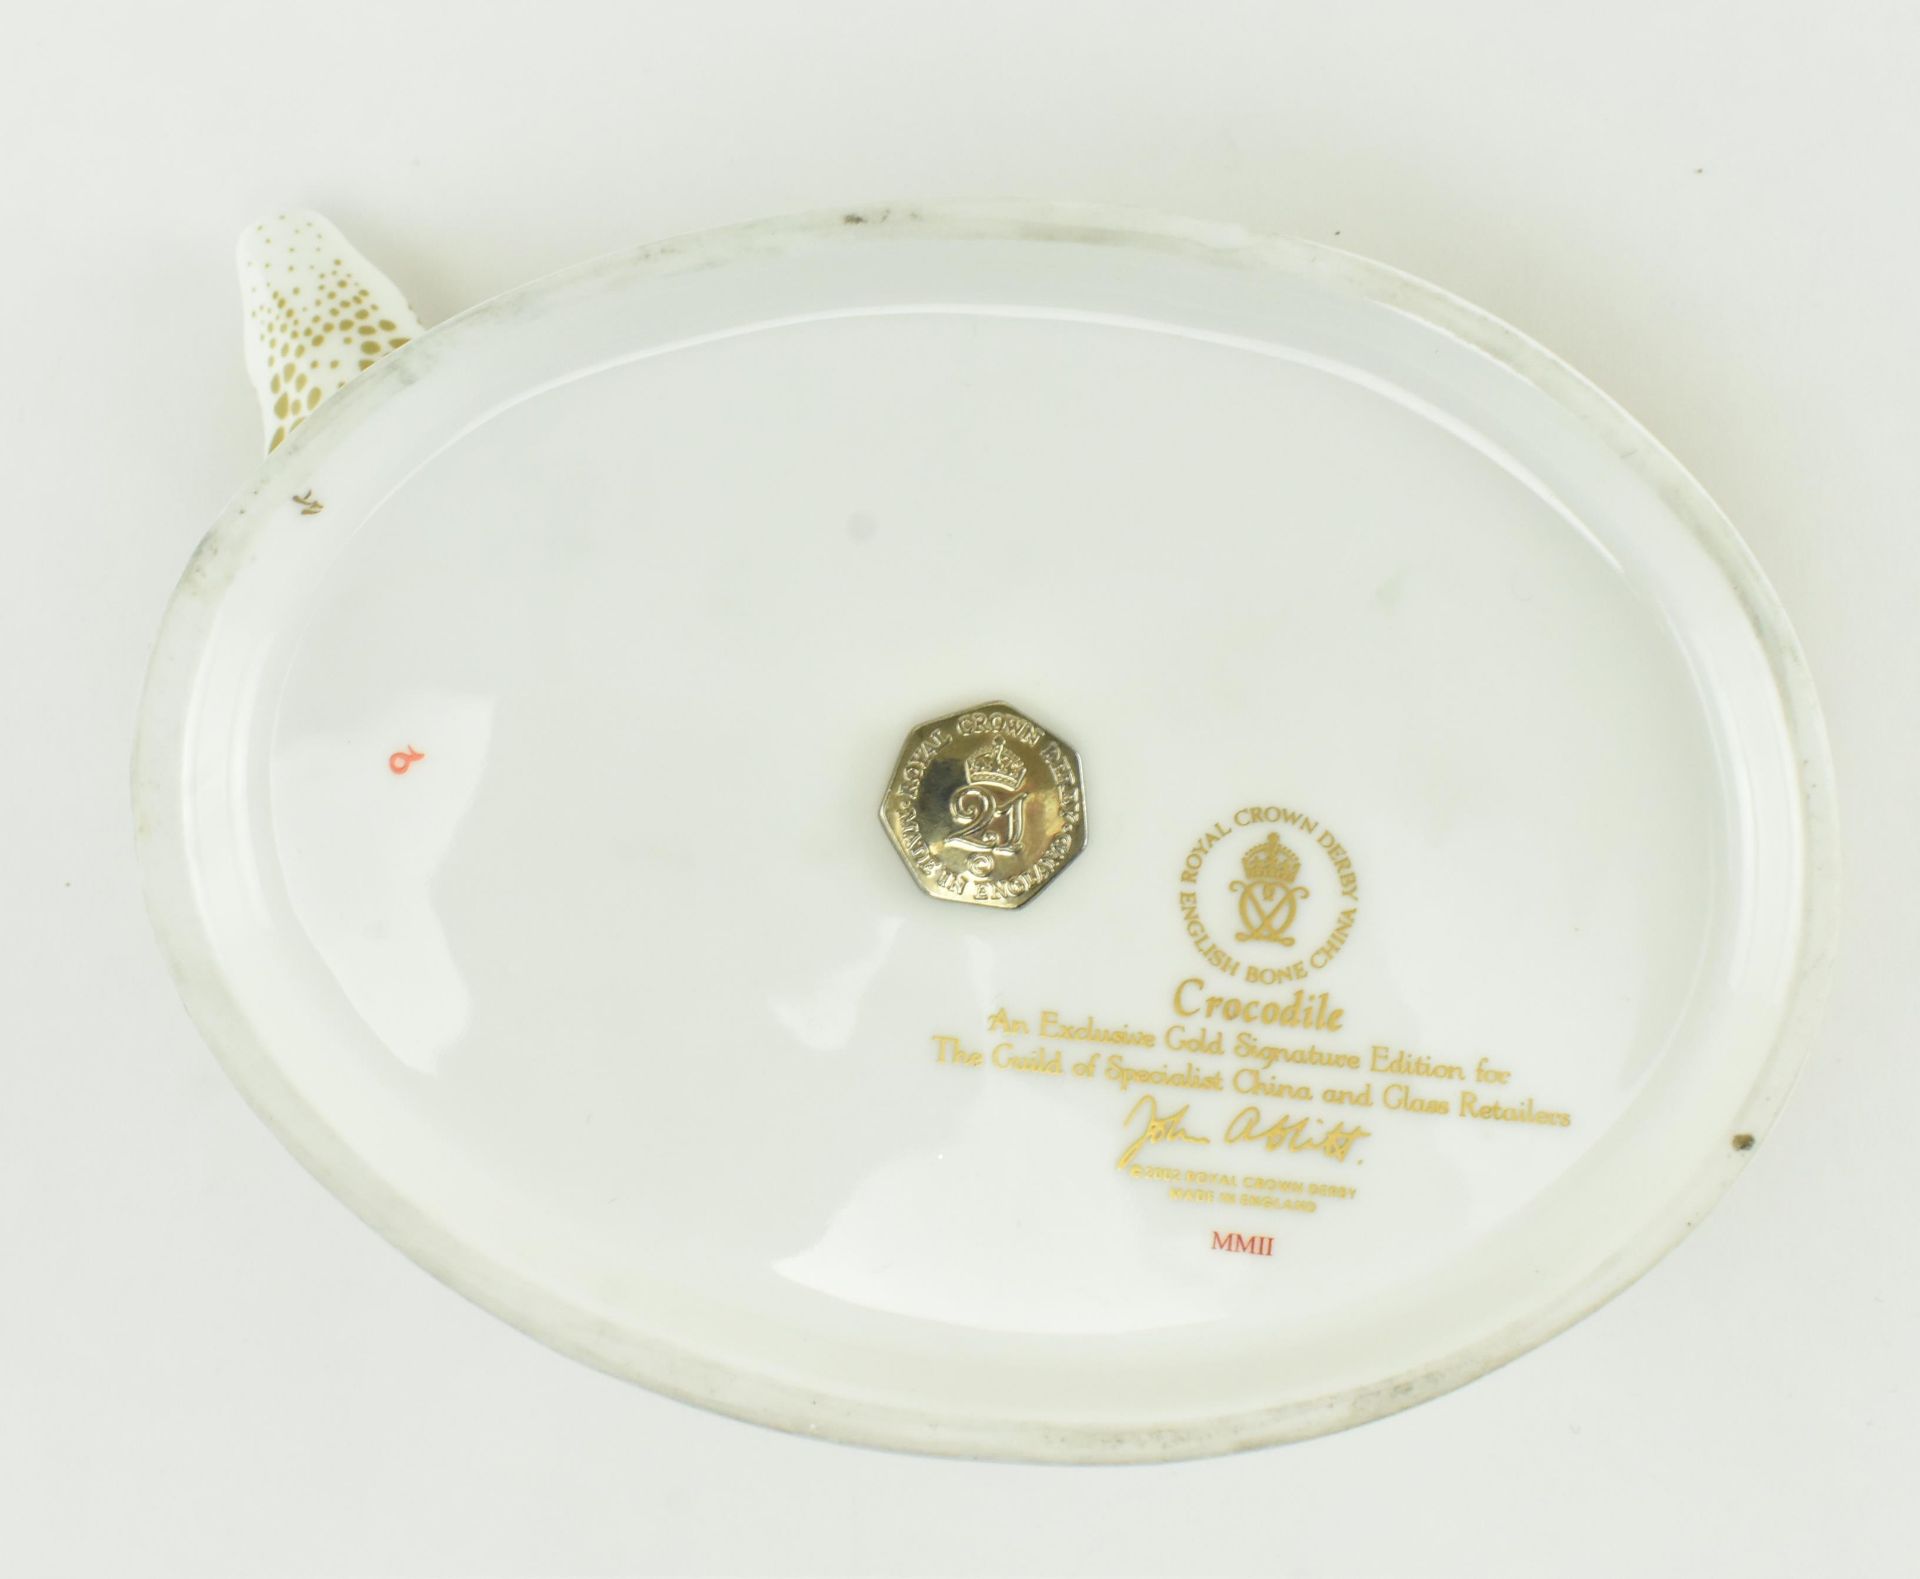 ROYAL CROWN DERBY - CROCODILE BONE CHINA PAPERWEIGHT - Image 5 of 5